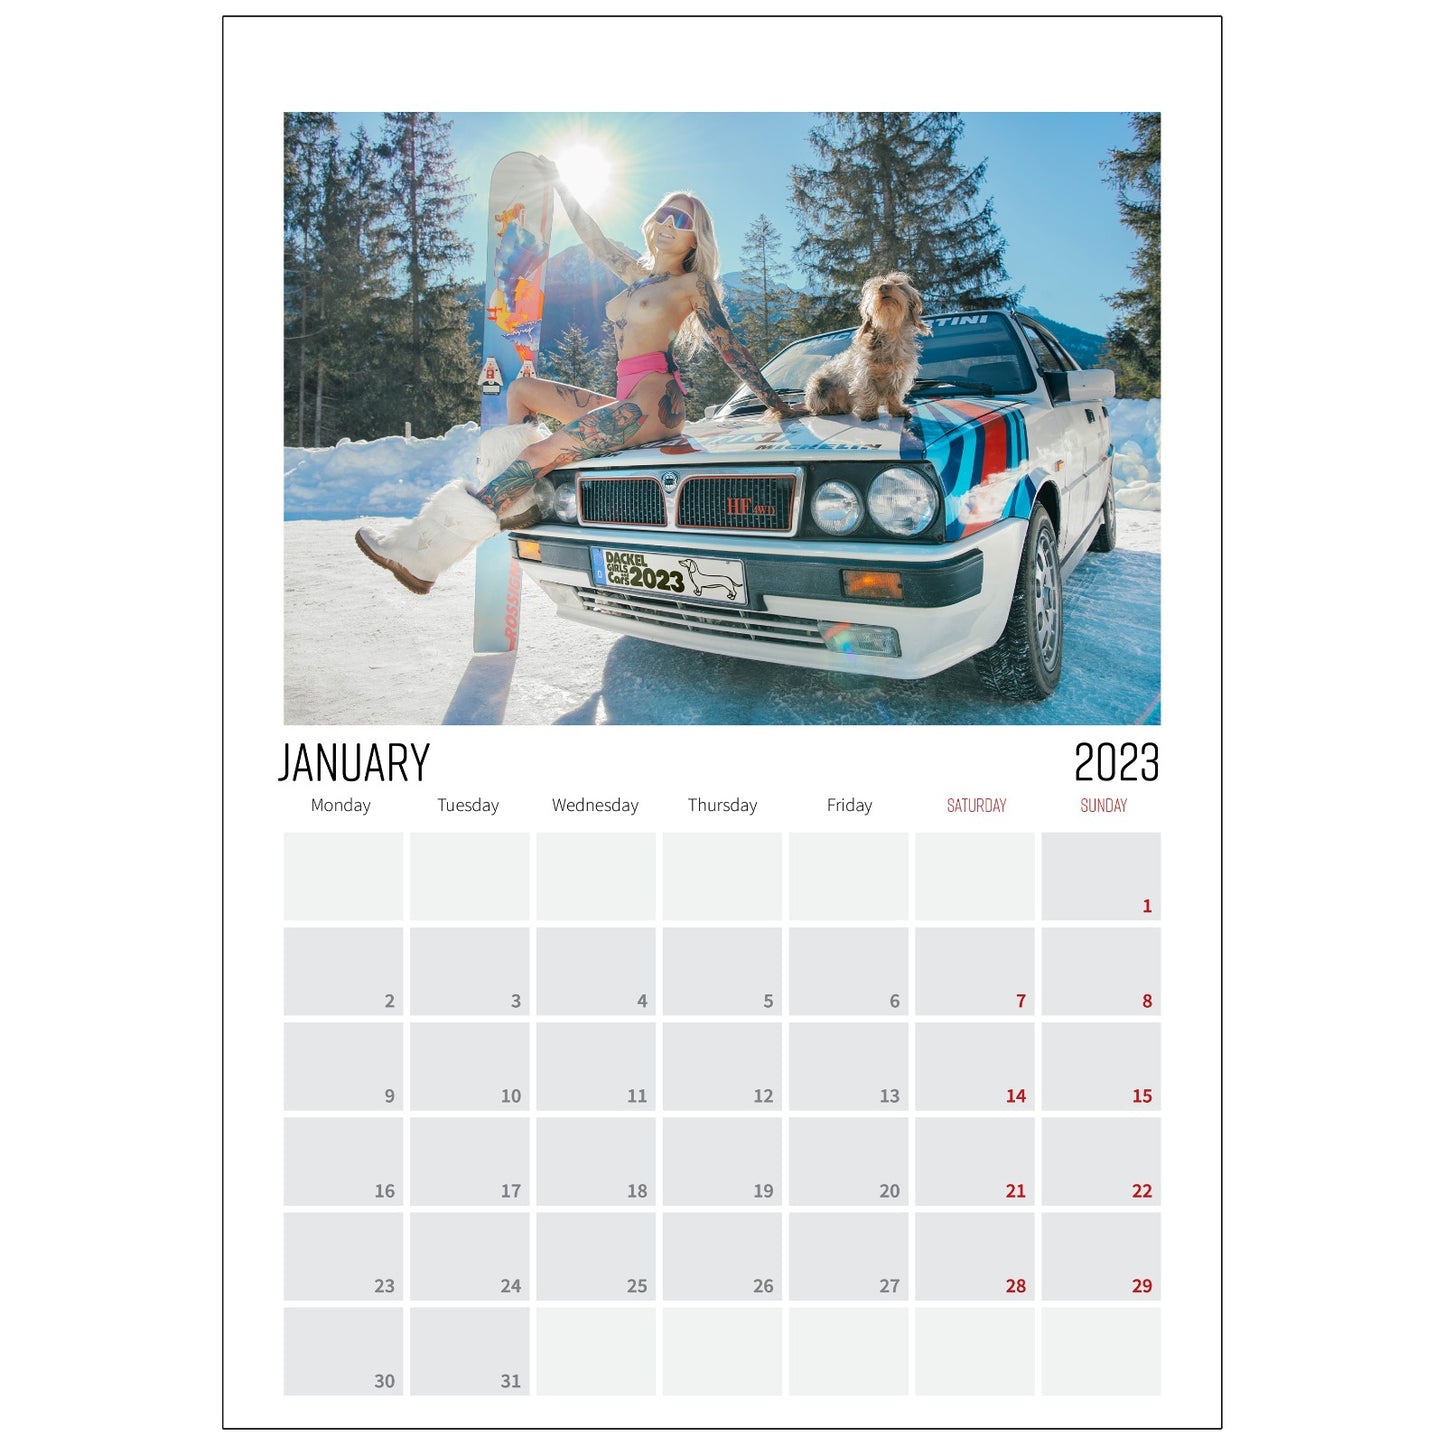 Dackel Girls and Cars Kalender 2023 in A4